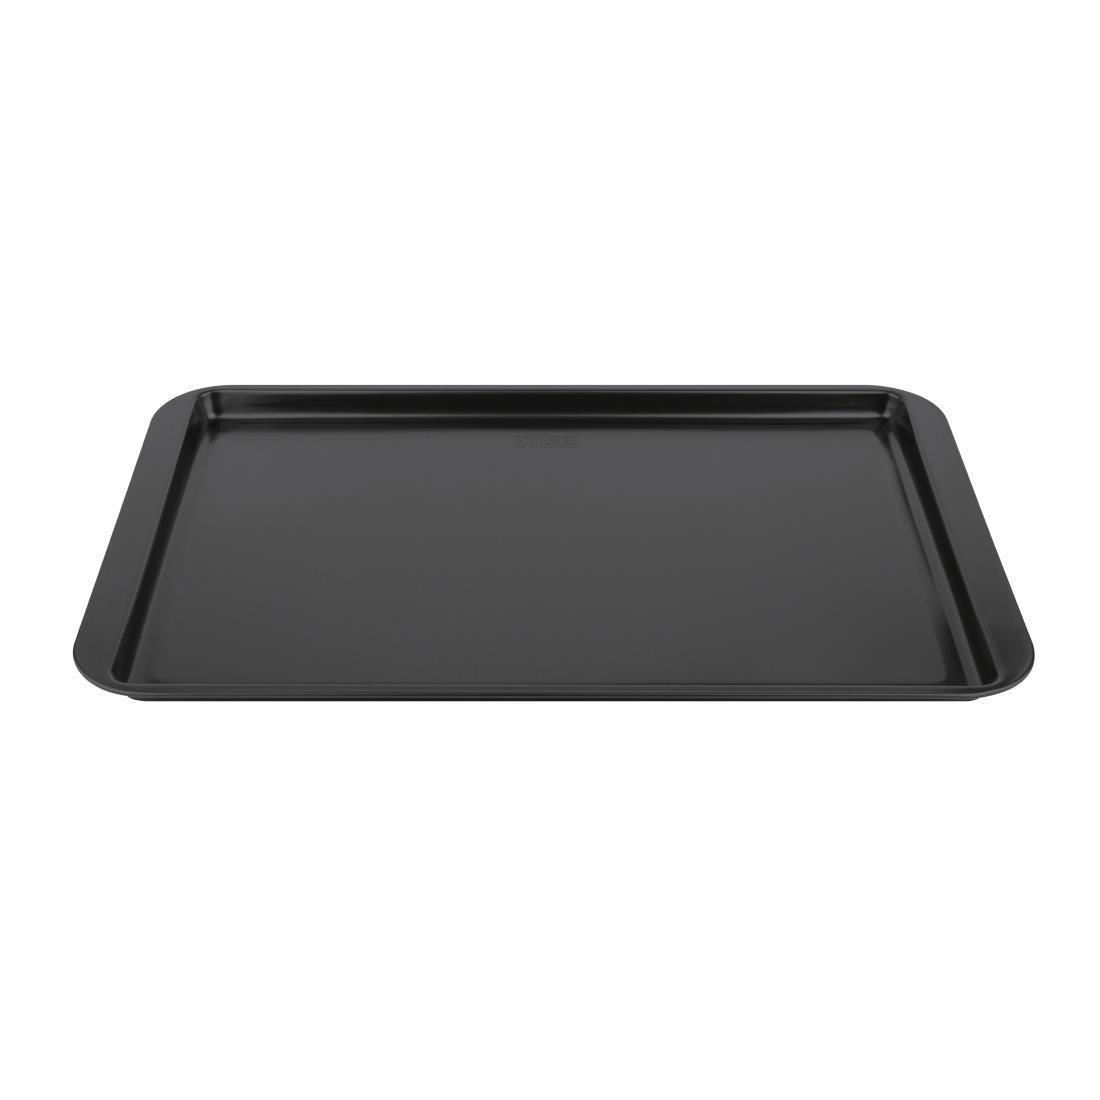 Vogue Non-Stick Carbon Steel Baking Tray 430 x 280mm - GD015  - 2